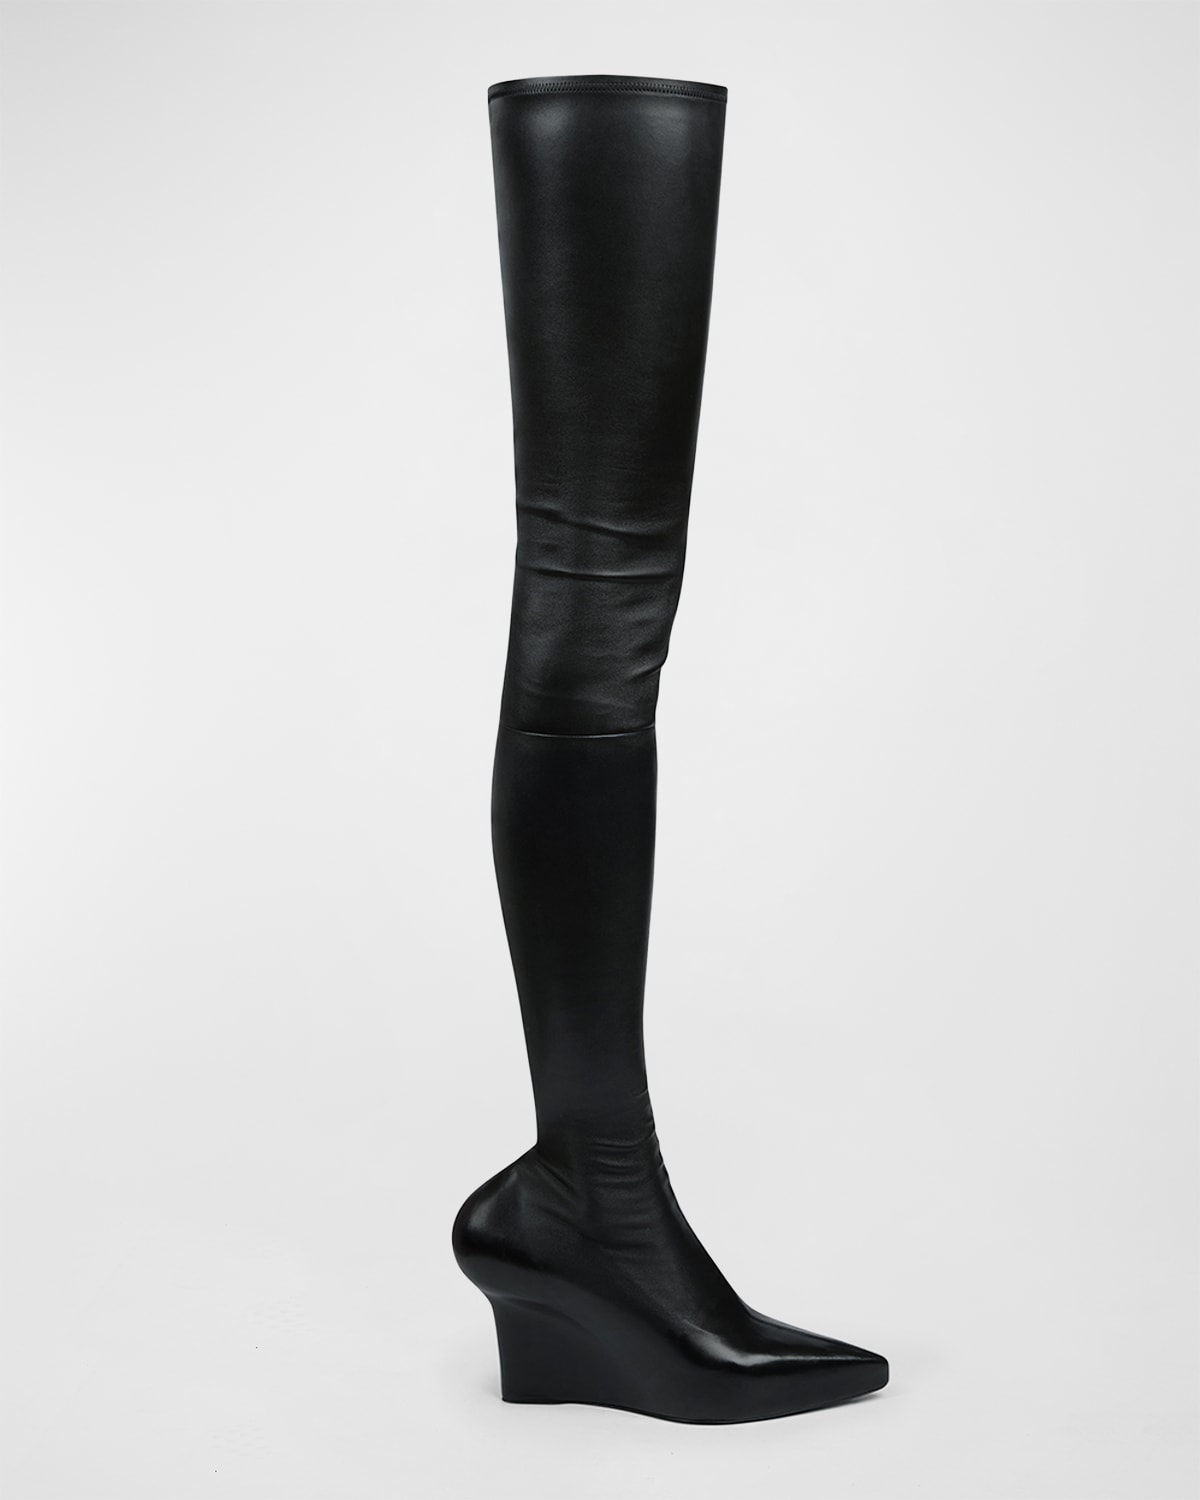 Givenchy Show Stretch Over-The-Knee Boots